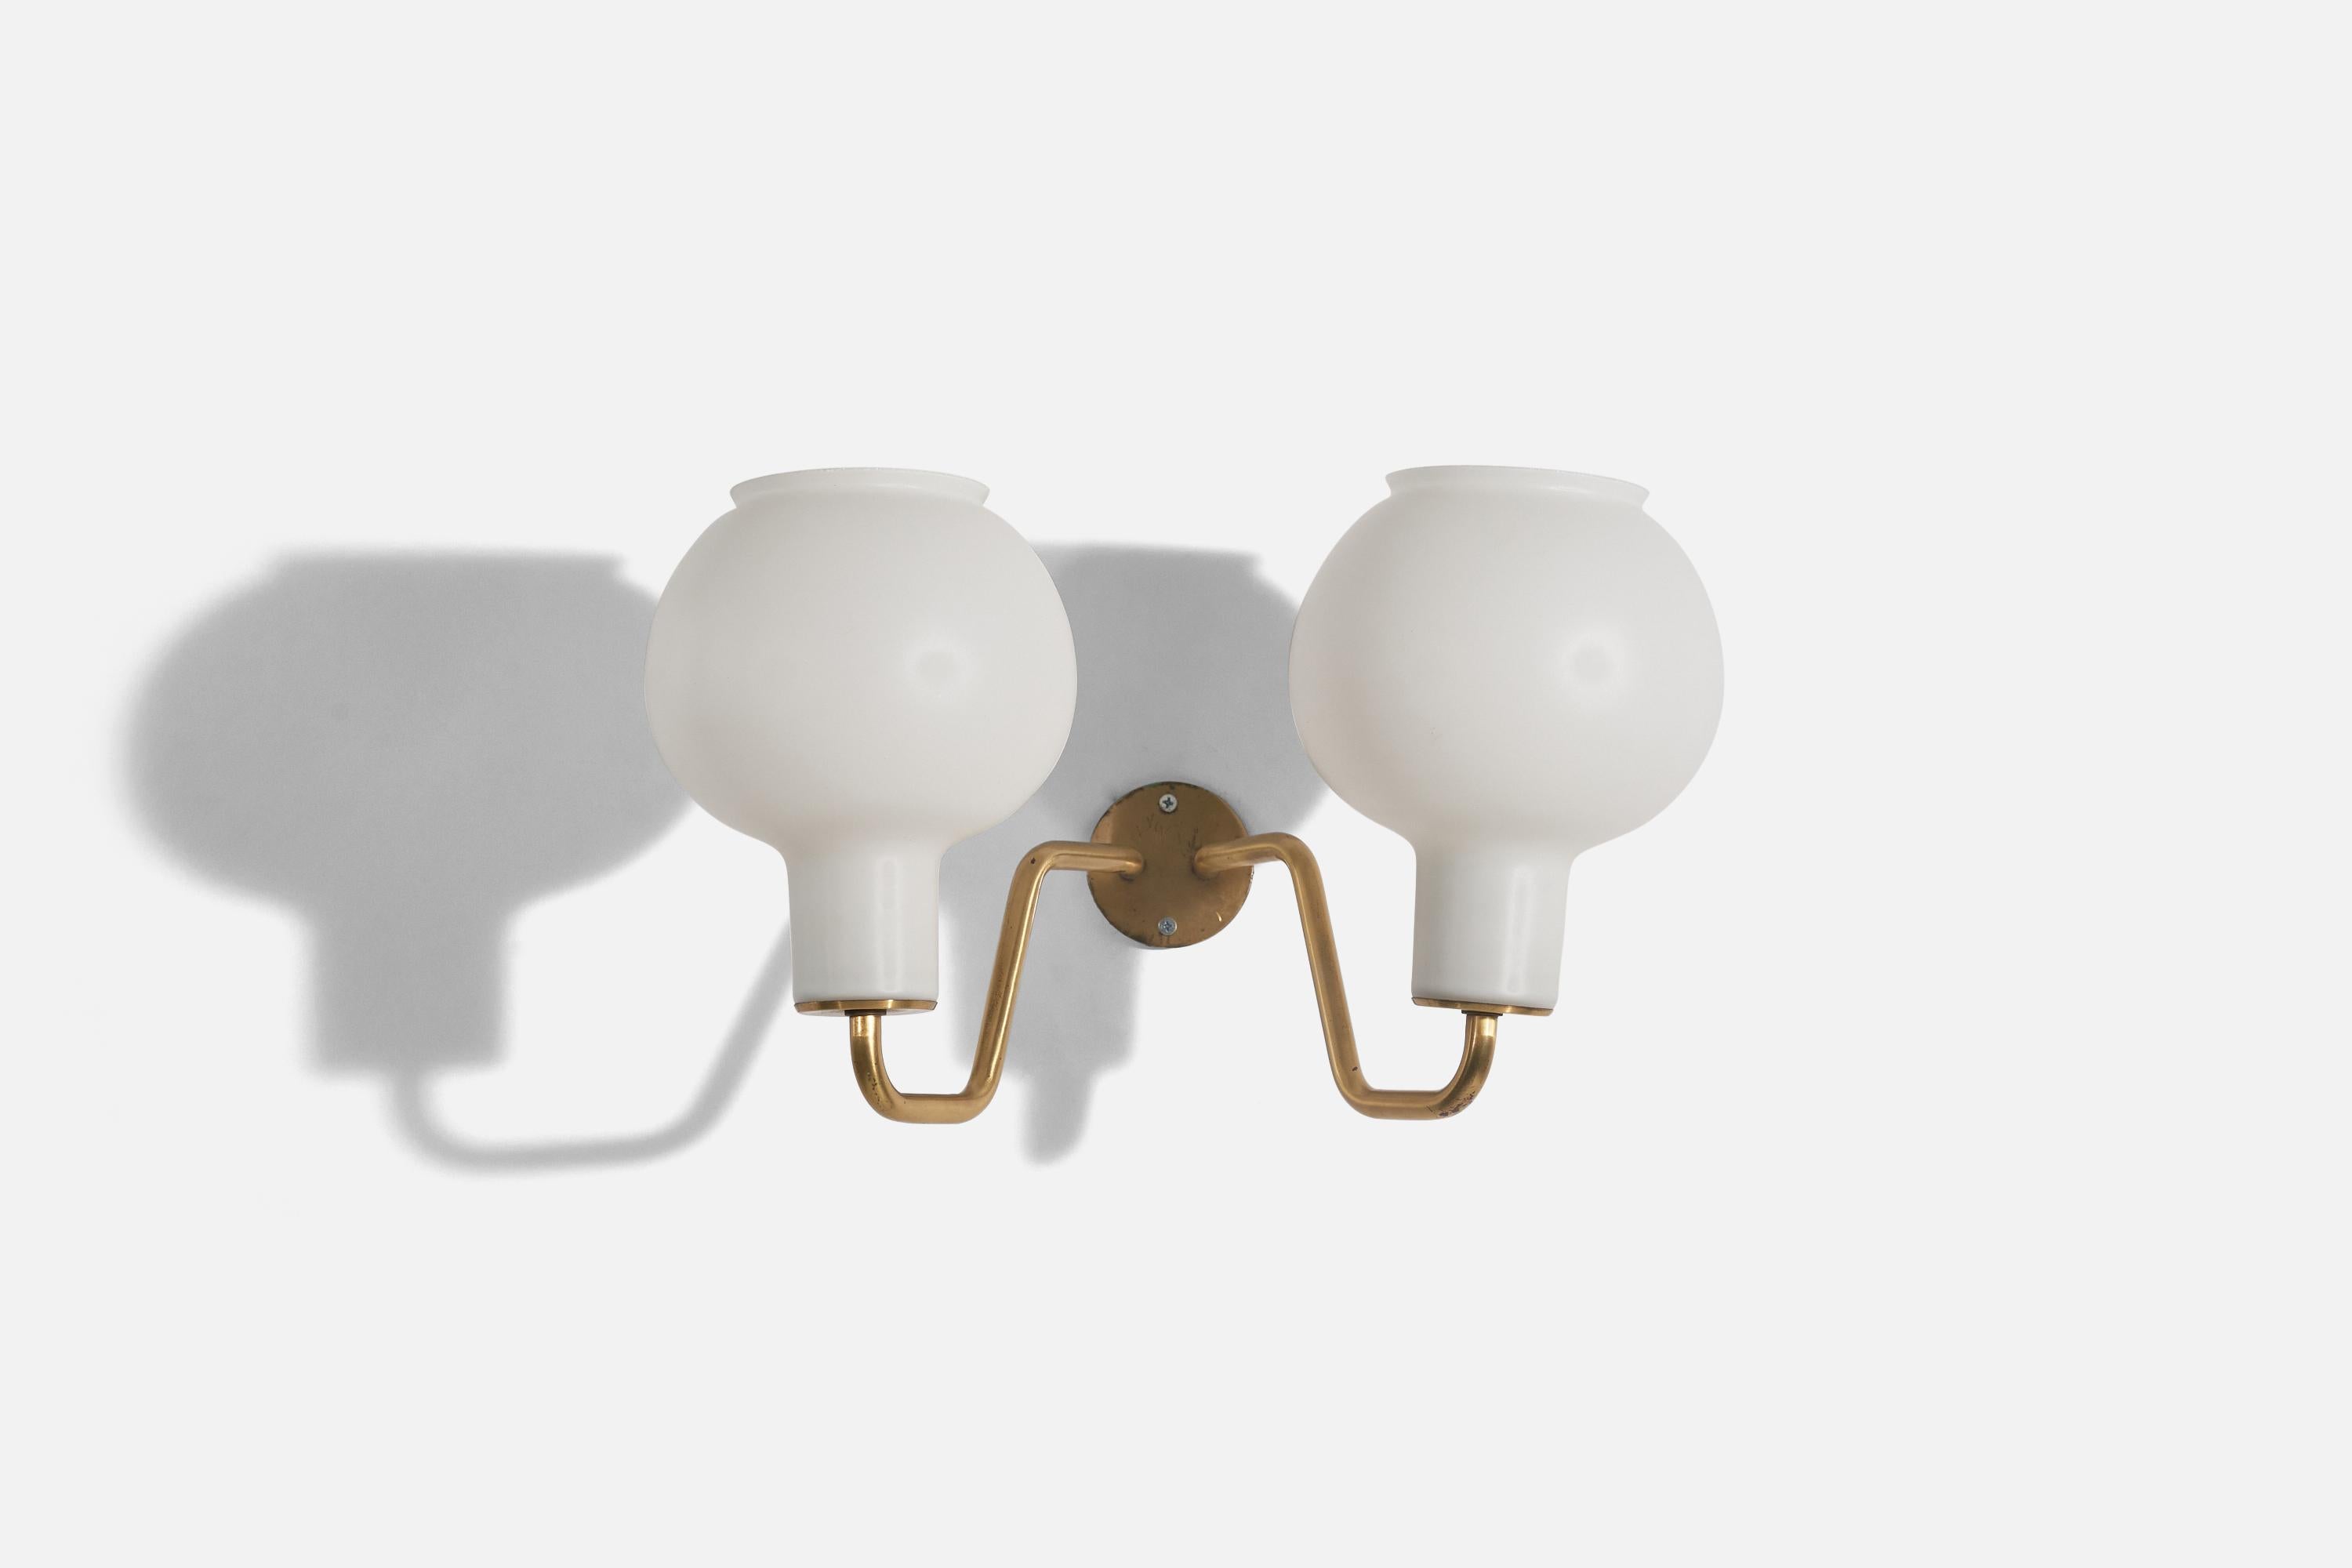 A two-light sconce / wall light designed by Vilhelm Lauritzen and produced by Louis Poulsen, Denmark, c. 1950s.

Dimensions of back plate (inches) : 2.96 x 2.96 x 0.12 (H x W x D).